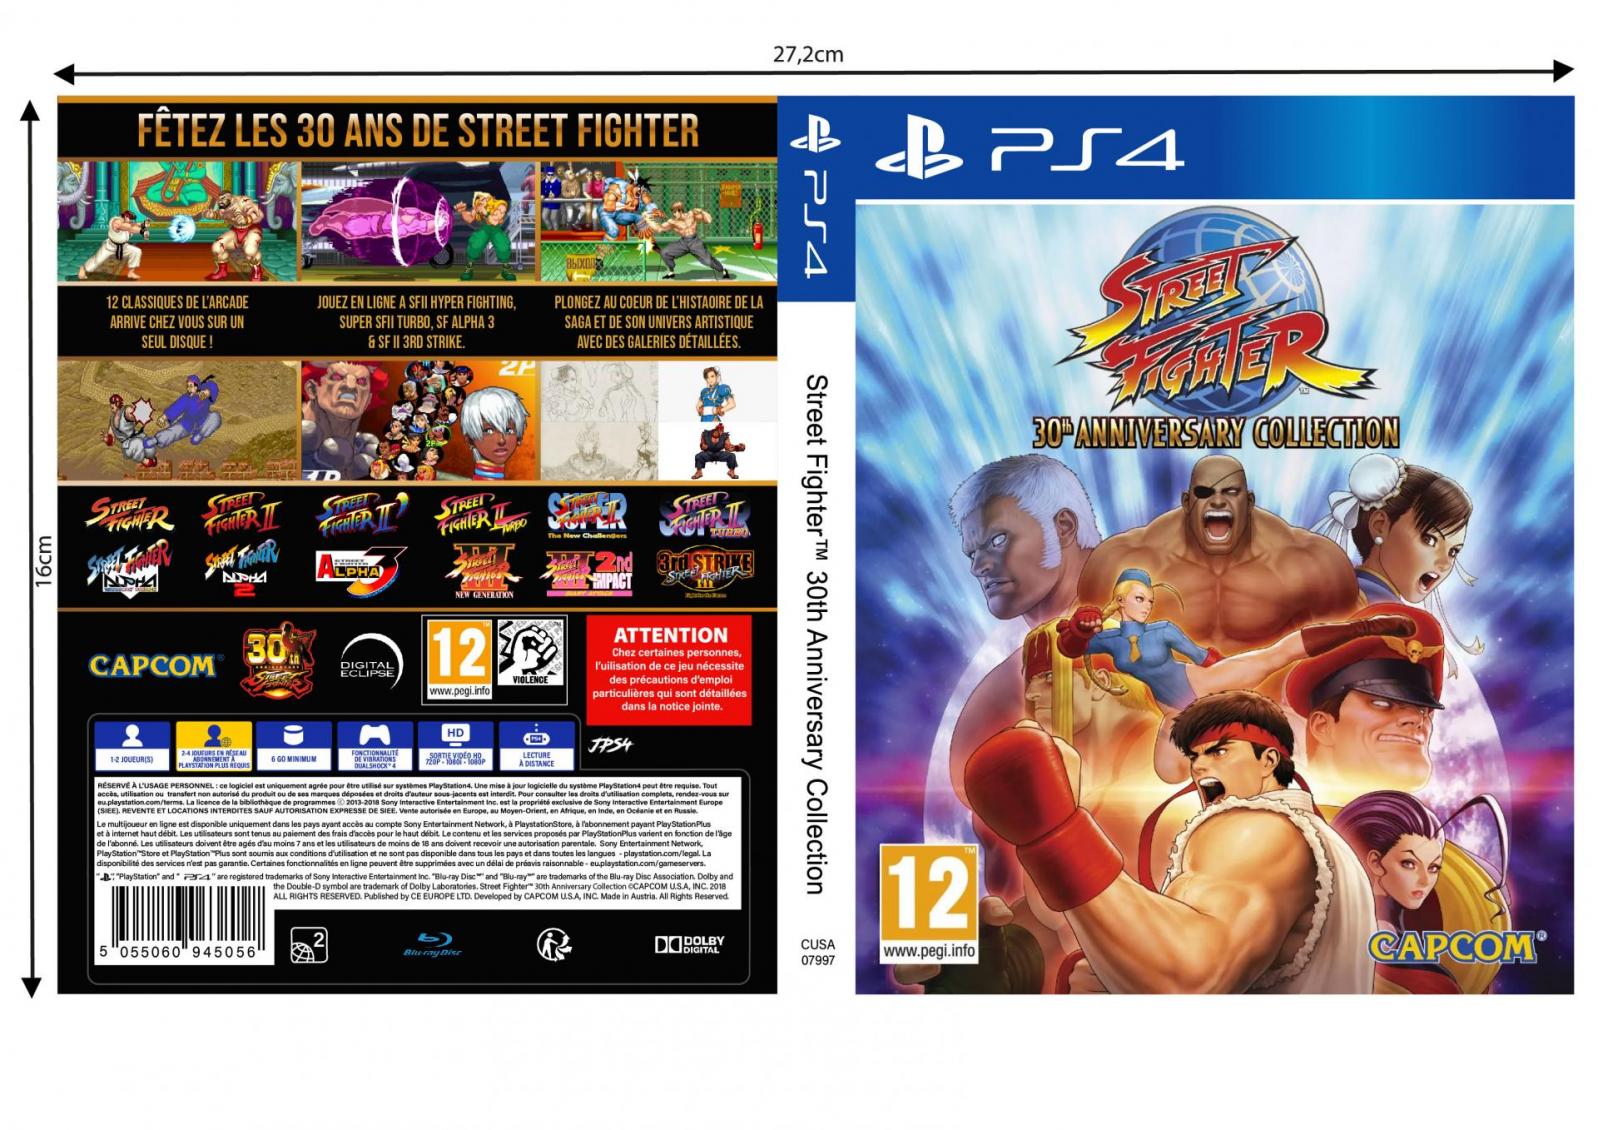 Street fighter 30th annivesary collection 1